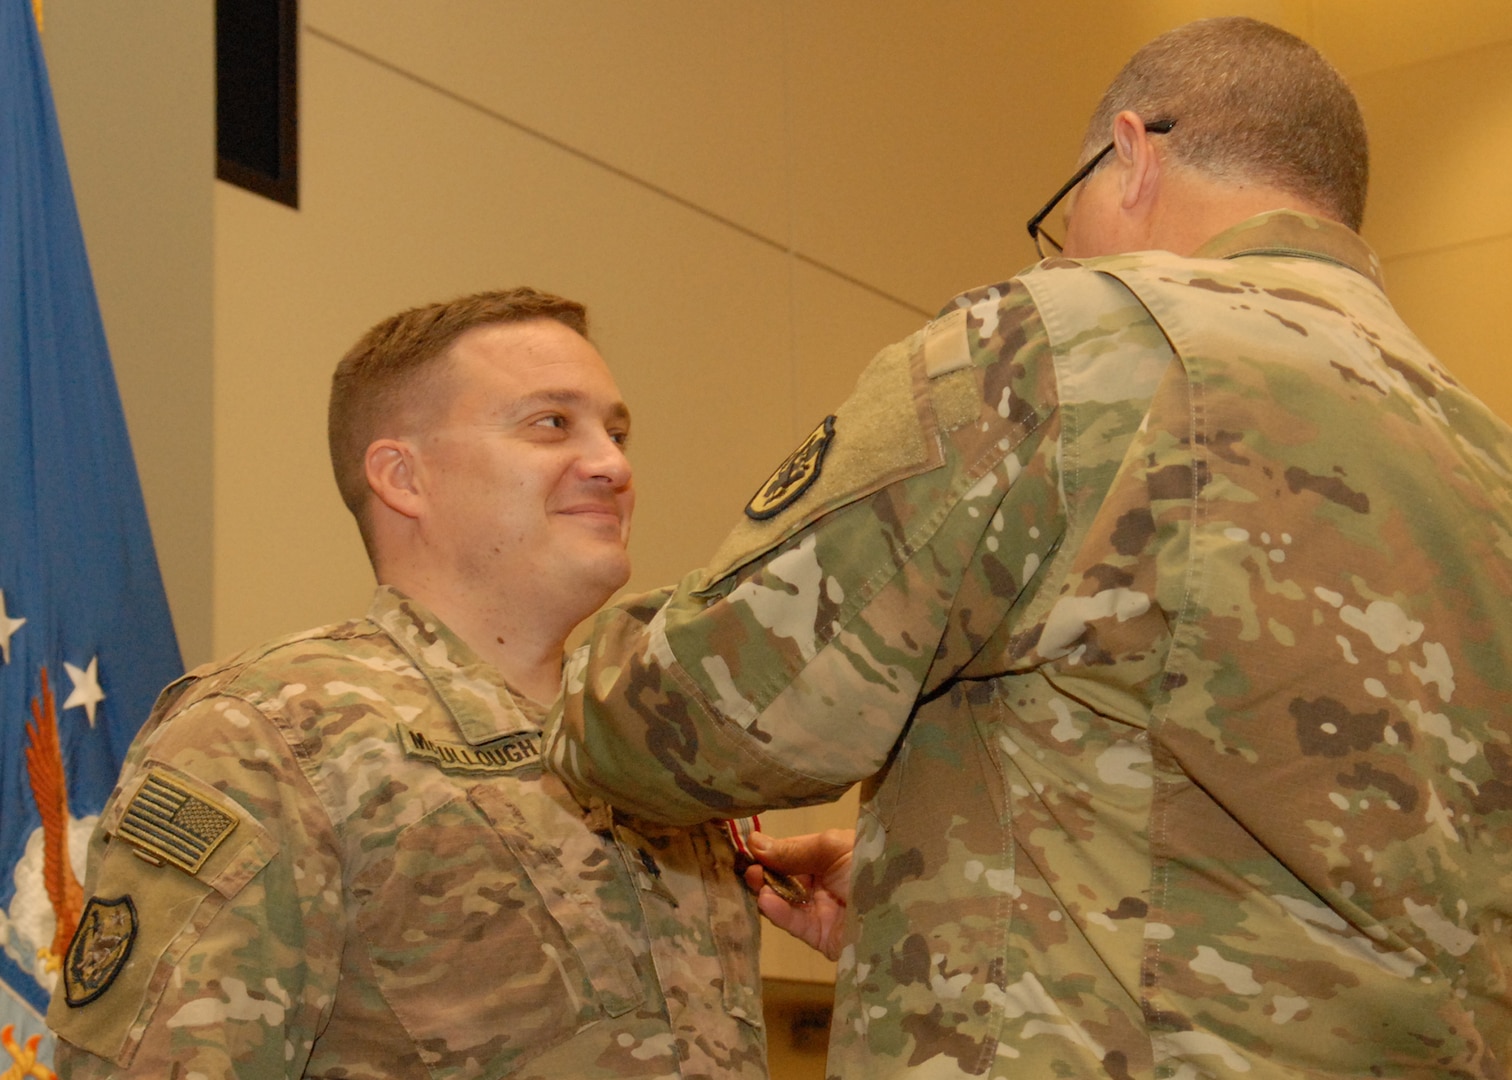 Army Lt. Col. Paul V. McCullough III is pinned with the Defense Meritorious Service Medal by Army Brig. Gen. Mark Simerly, DLA Troop Support commander, during a quarterly awards ceremony May 30. McCullough’s award was in recognition of his deployment as the commander of the DLA Support Team in Kuwait in 2017.